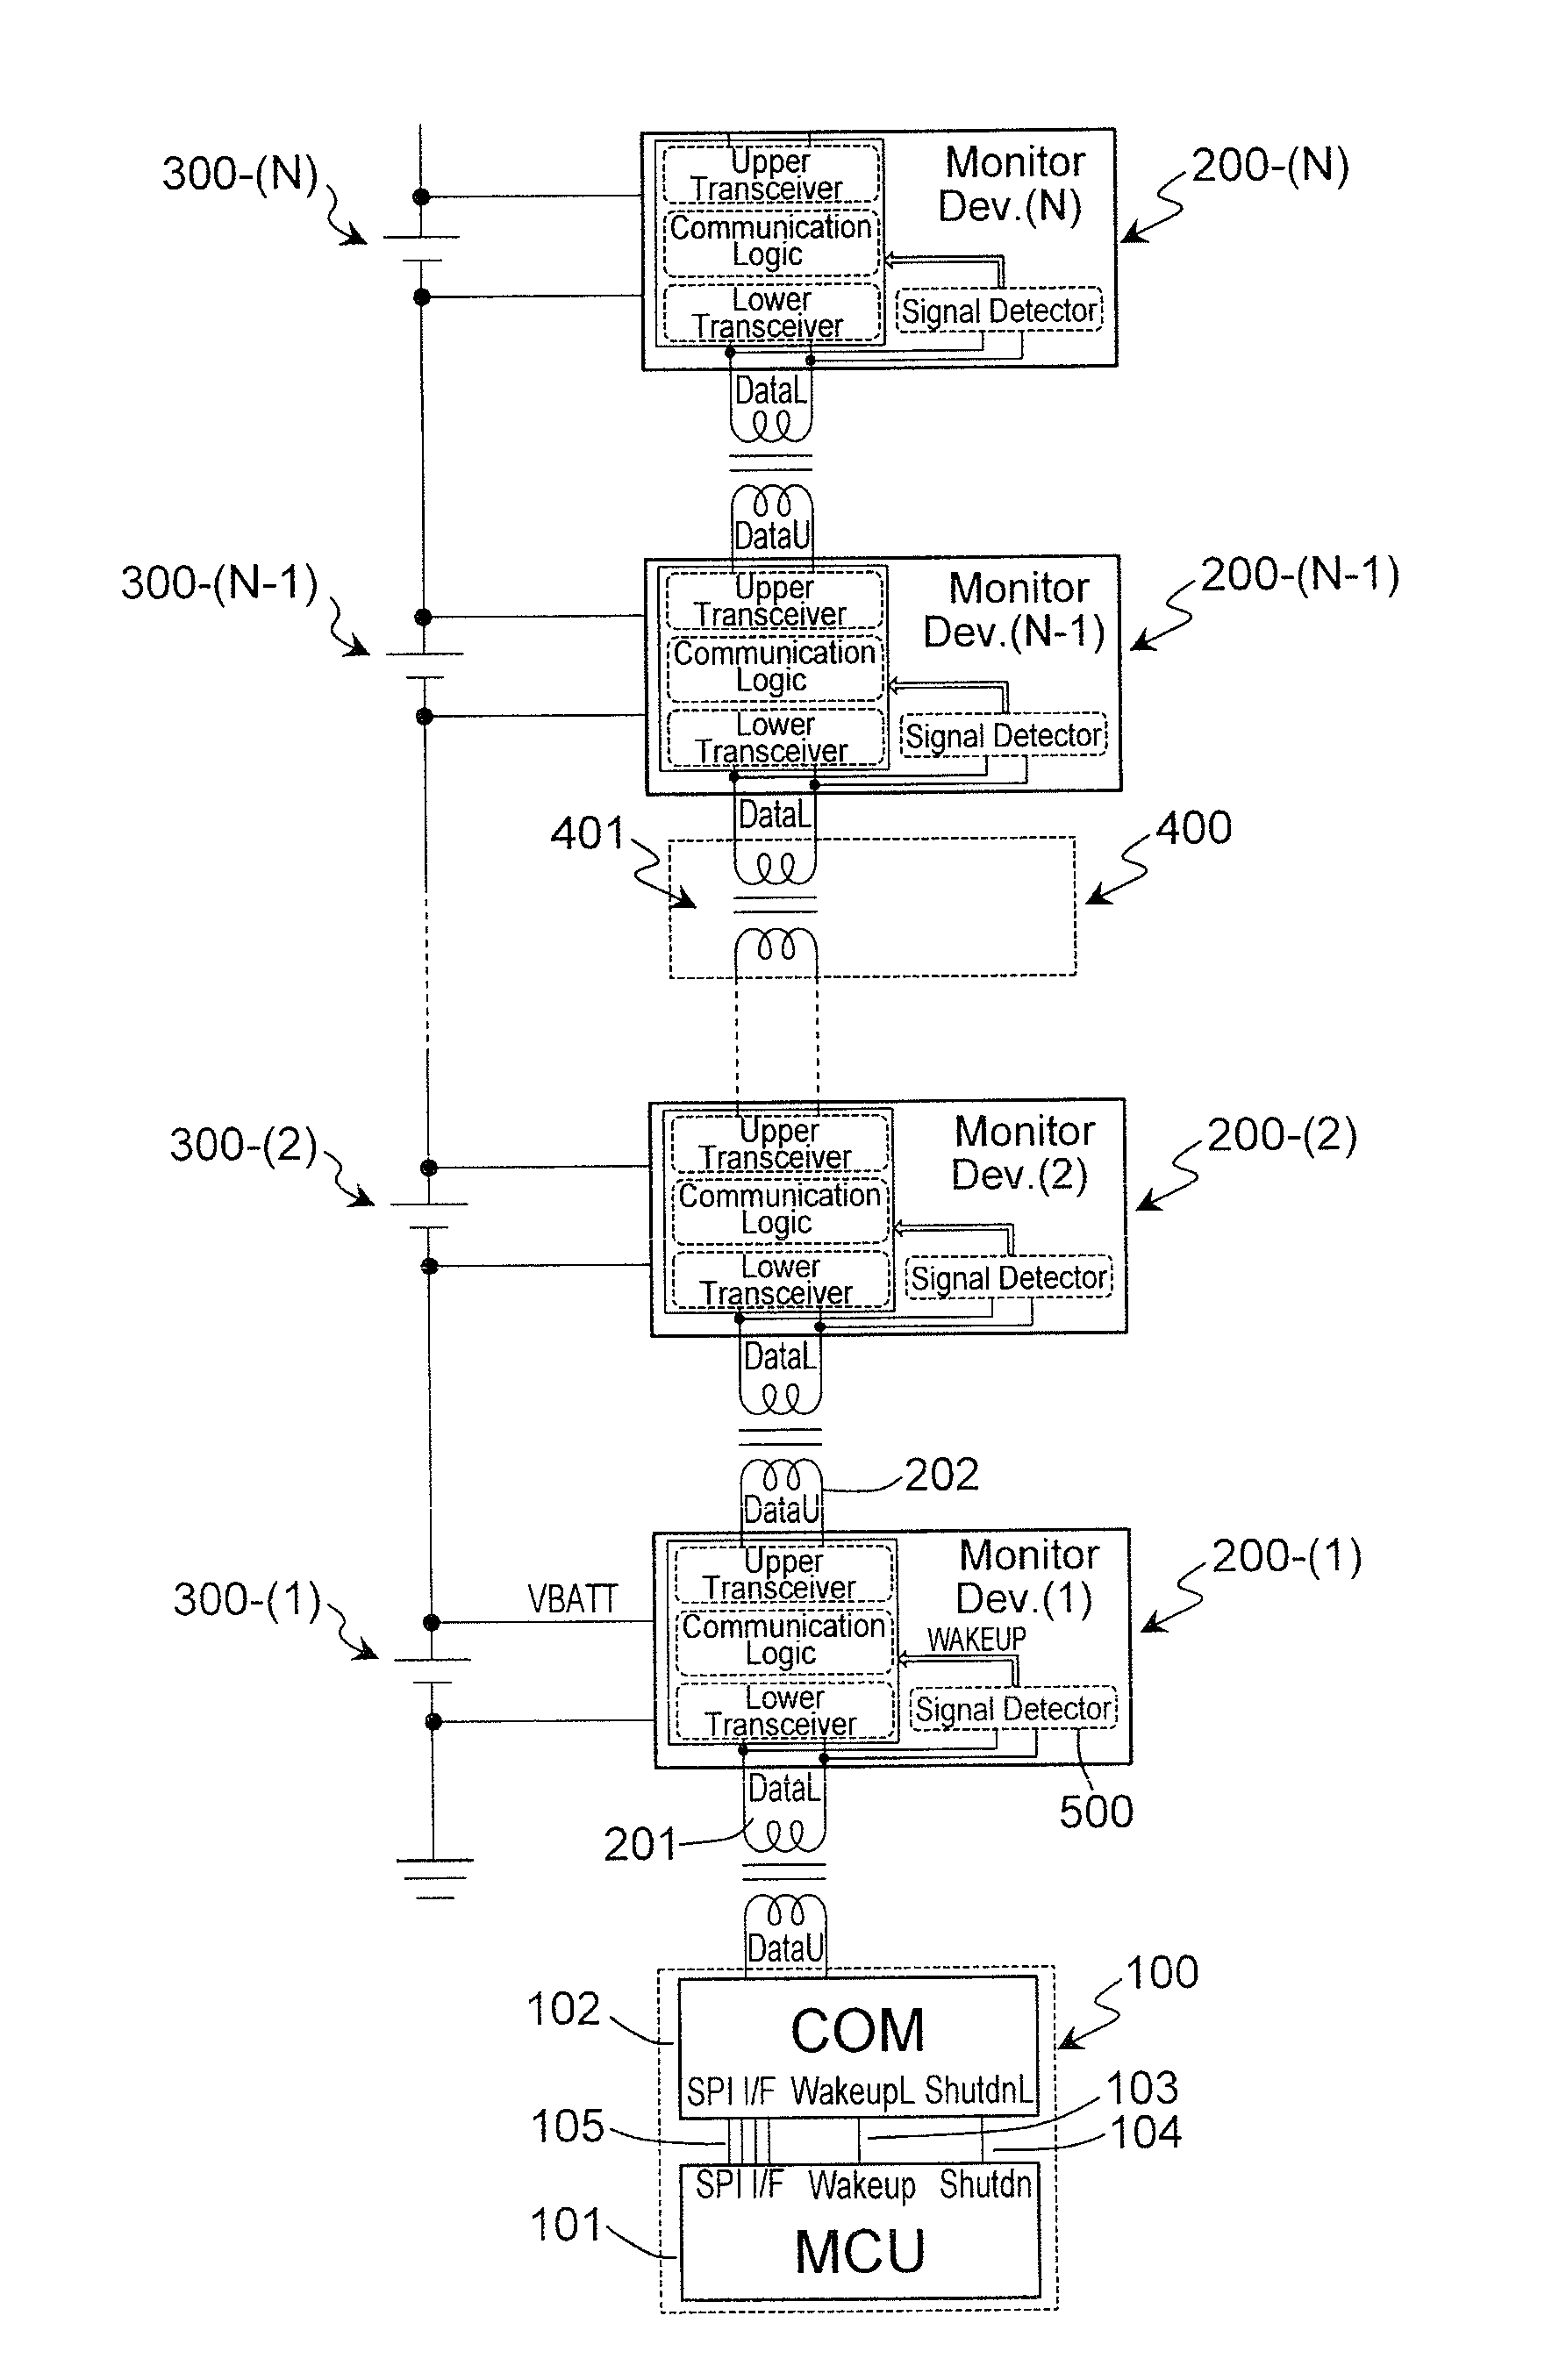 Wakeup sequence for two-wire daisy chain communication system